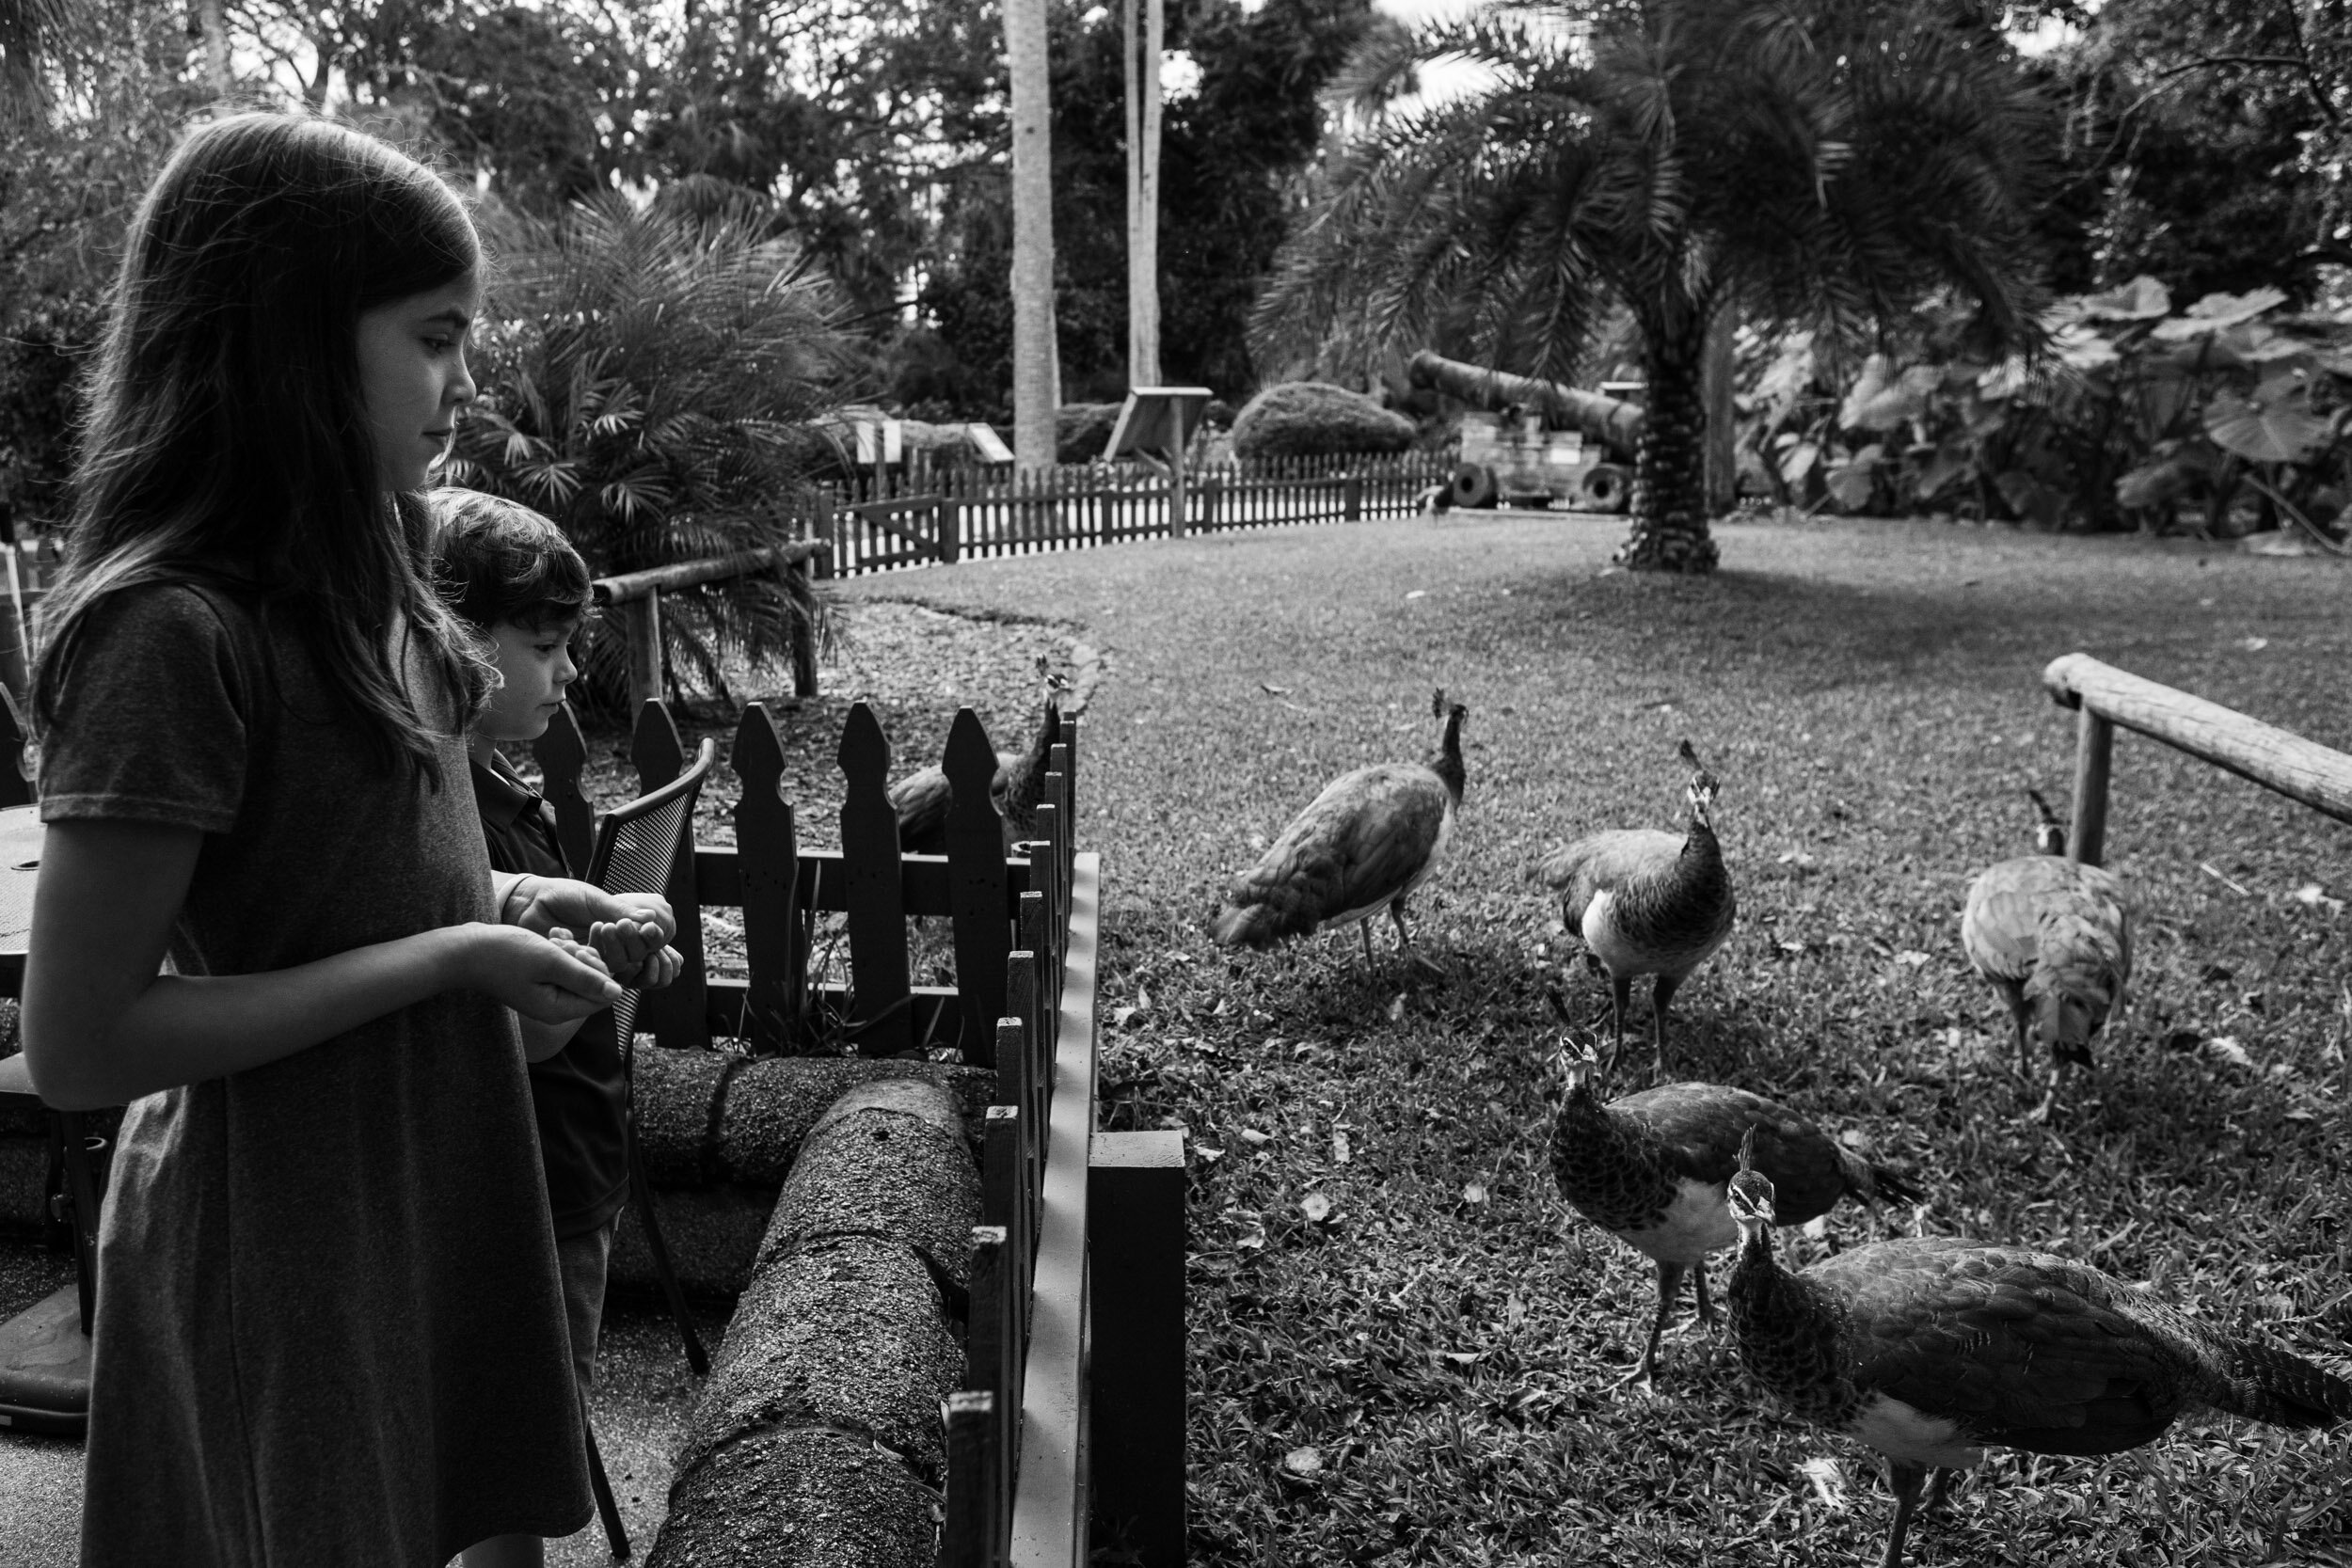 Children feeding peacocks at the Fountain of Youth